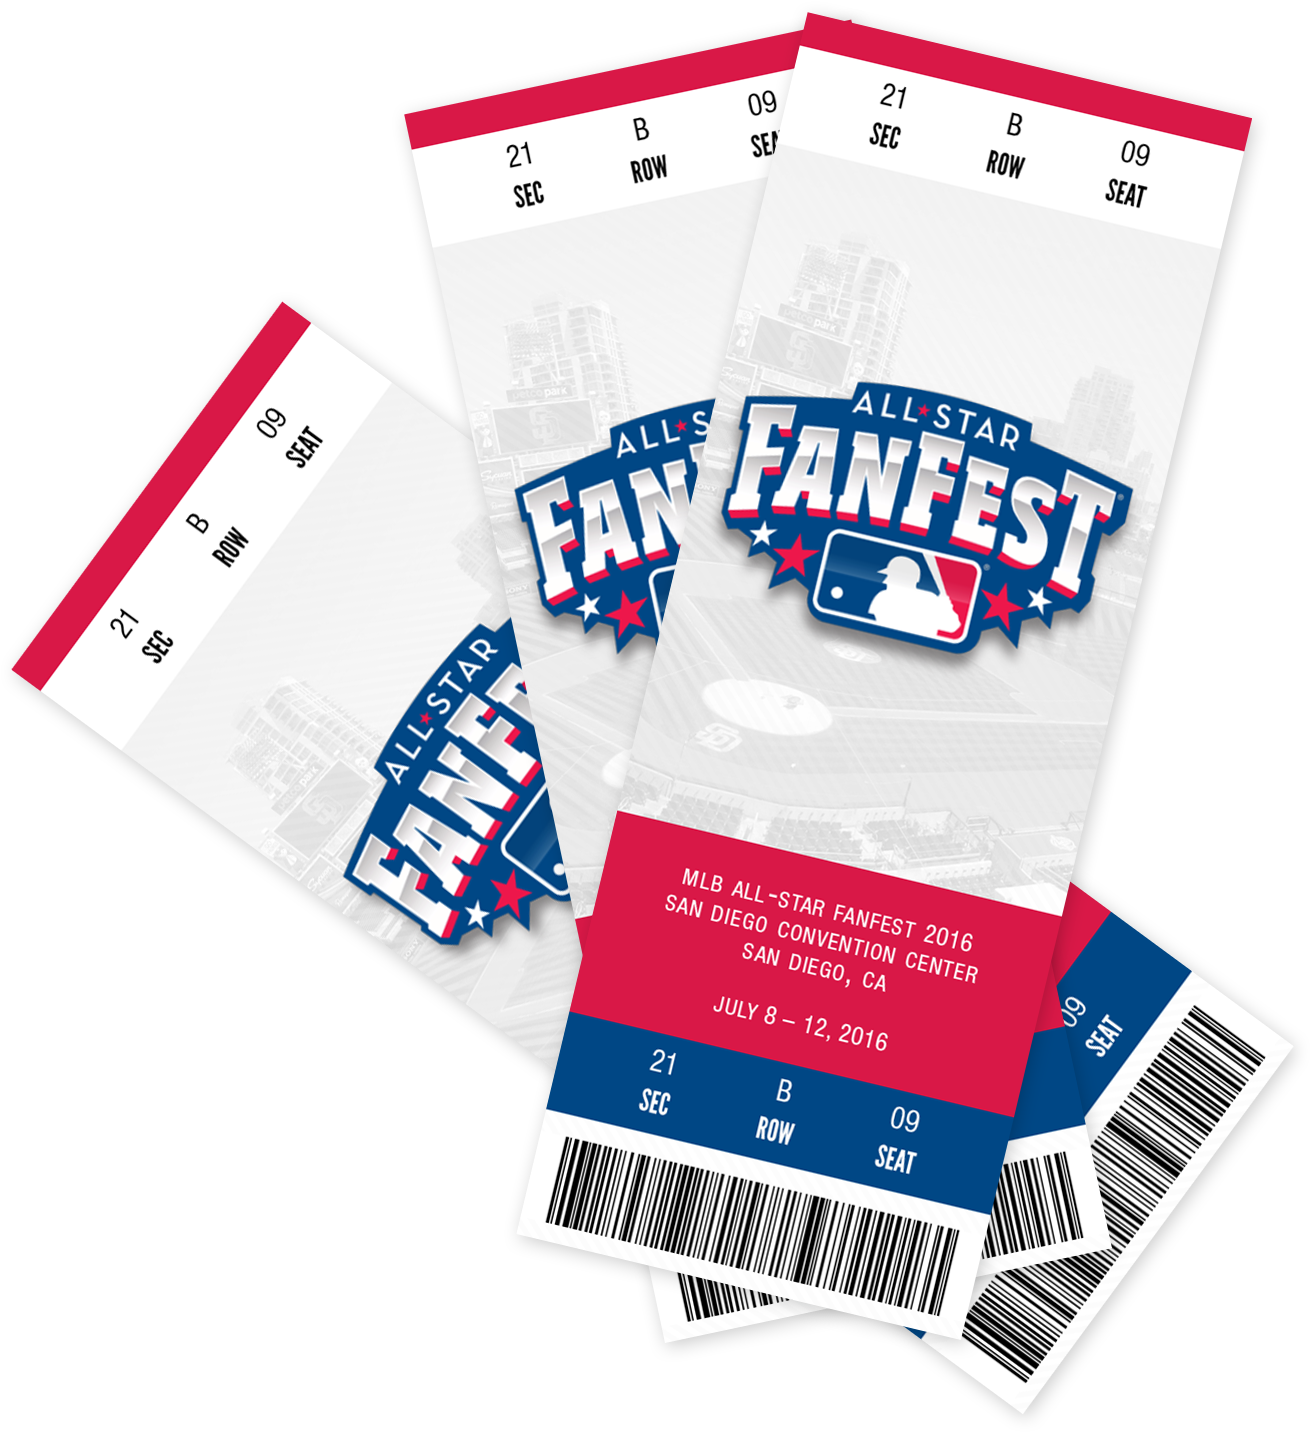 Buy Tickets For The 2016 Mlb All-star Fanfest - Mlb All Star Game 2016 Tickets (1346x1485)